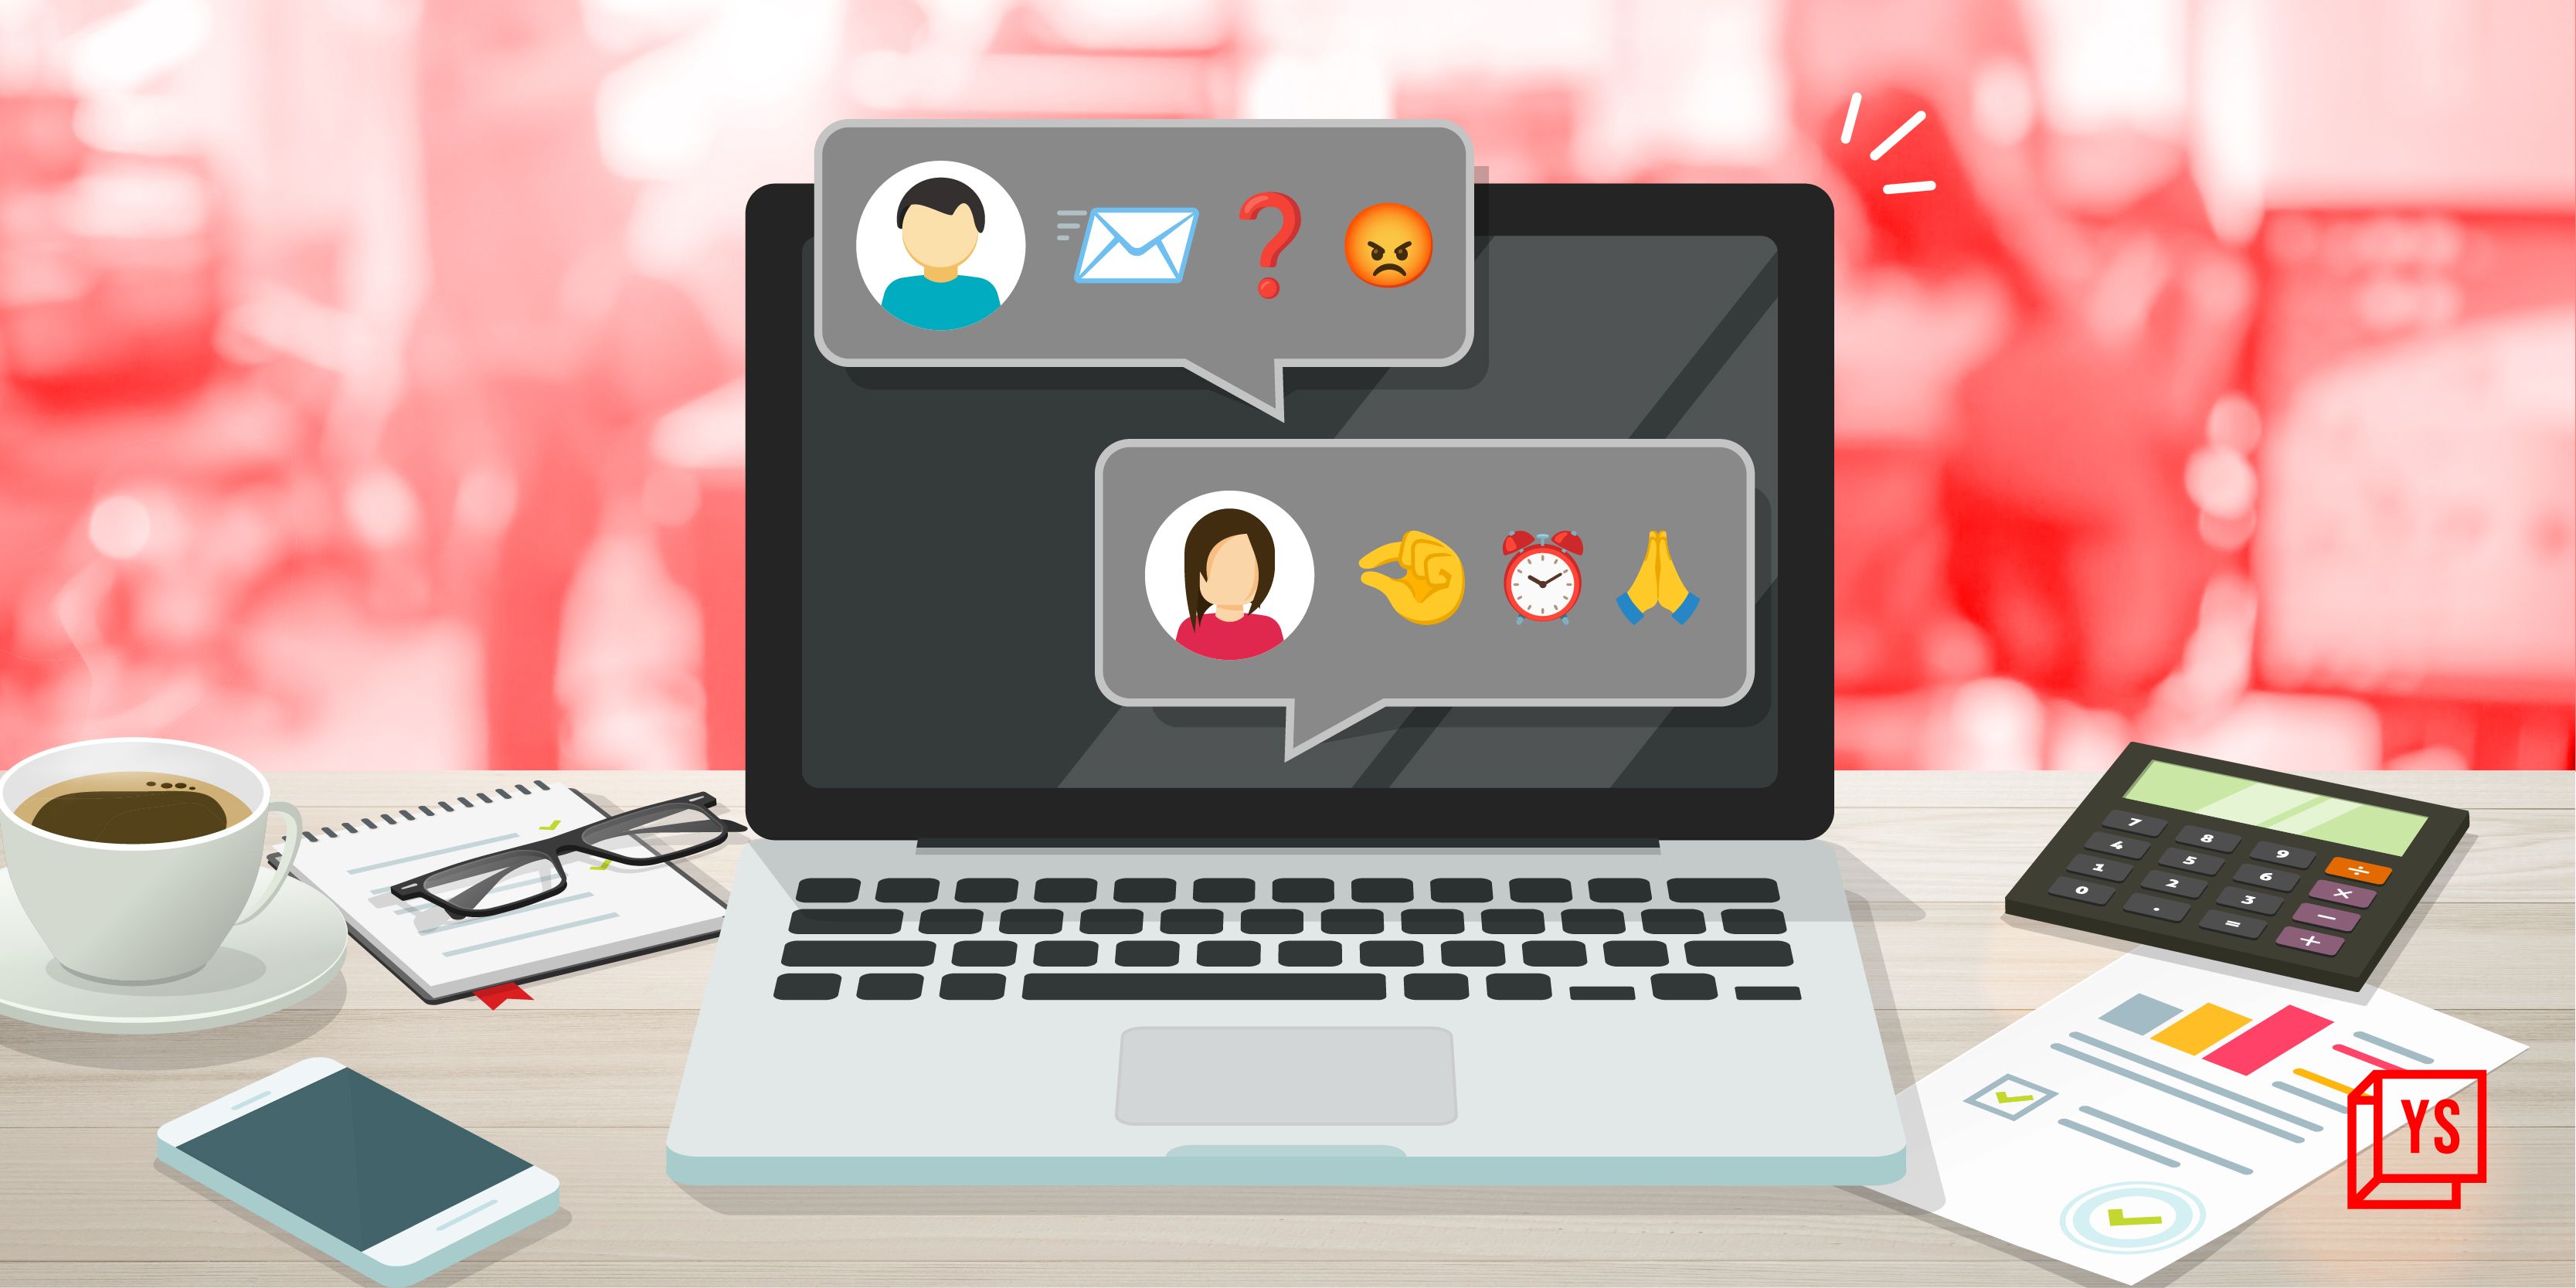 How emojis are evolving into essential tools of communication in workplace